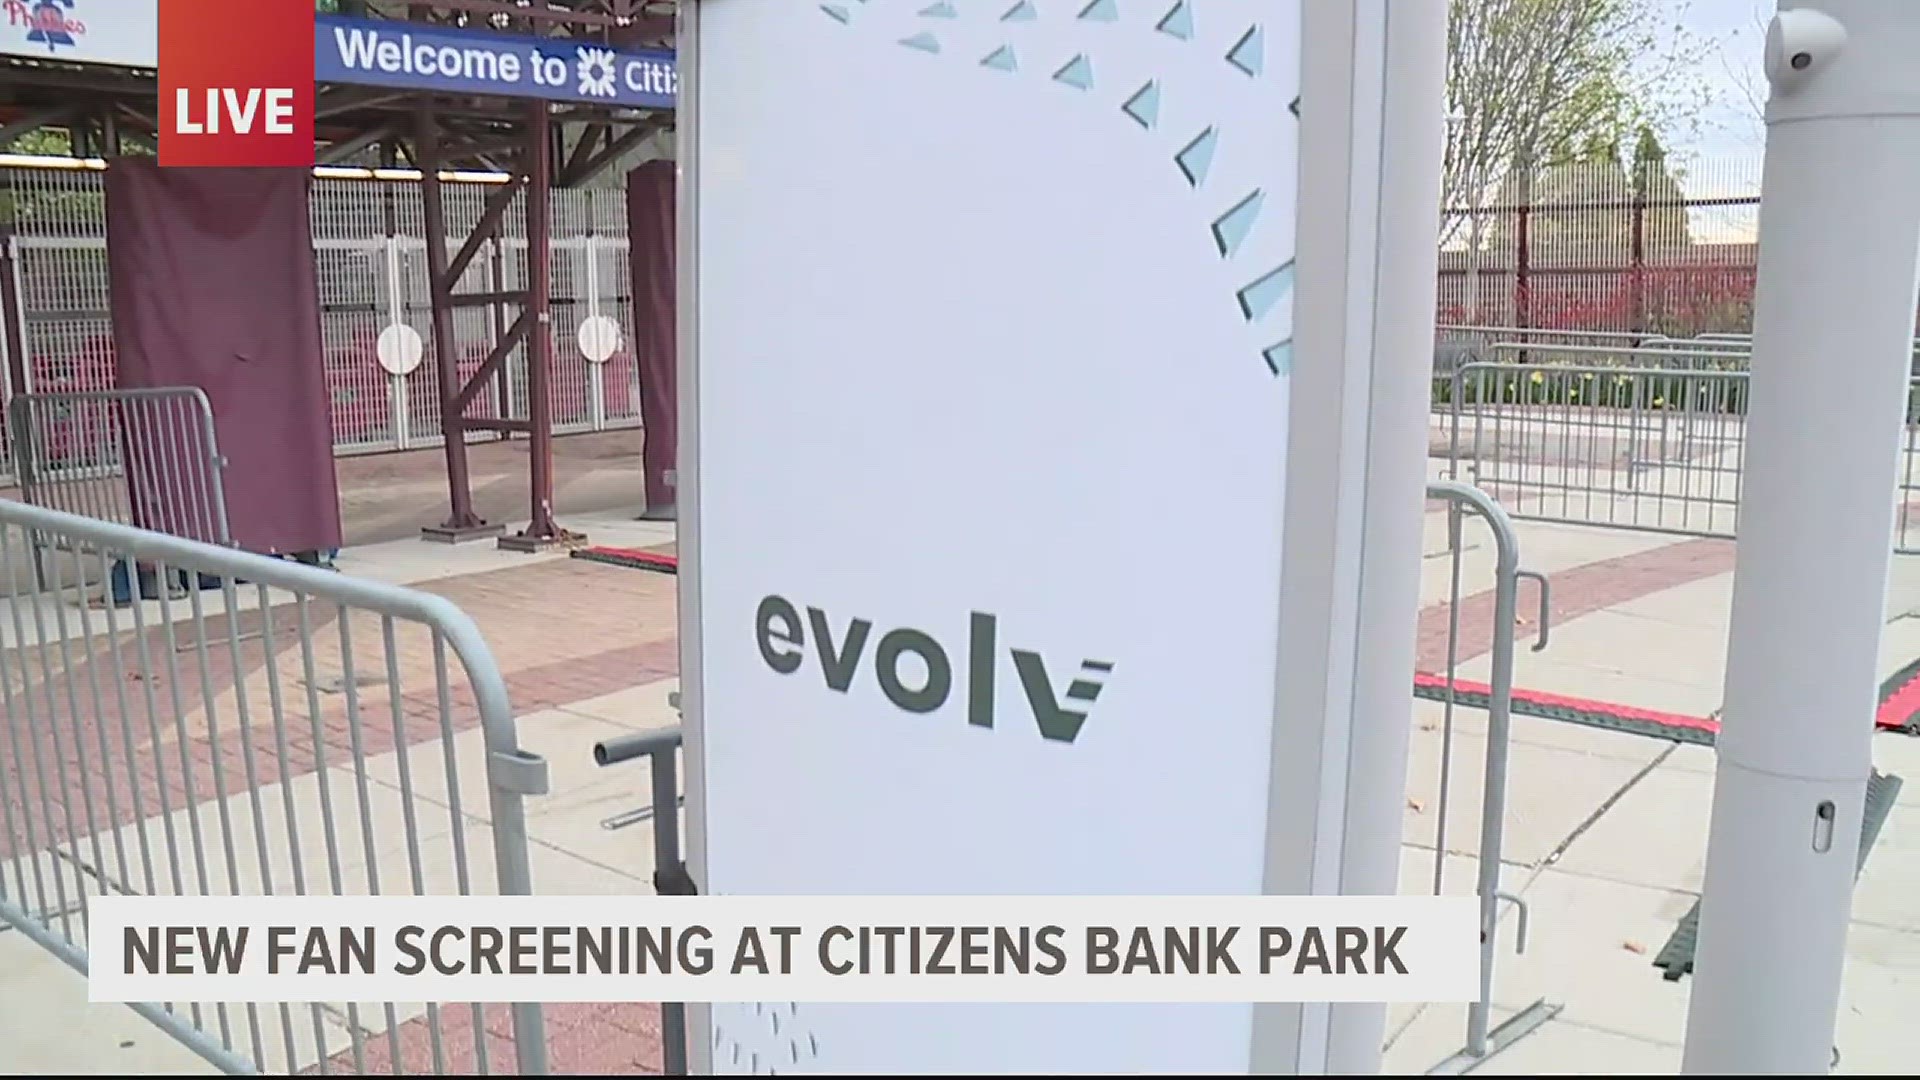 The team is using Evolv technology to allow fans to be screened while entering Citizens Bank Park without having to empty their pockets or bags.